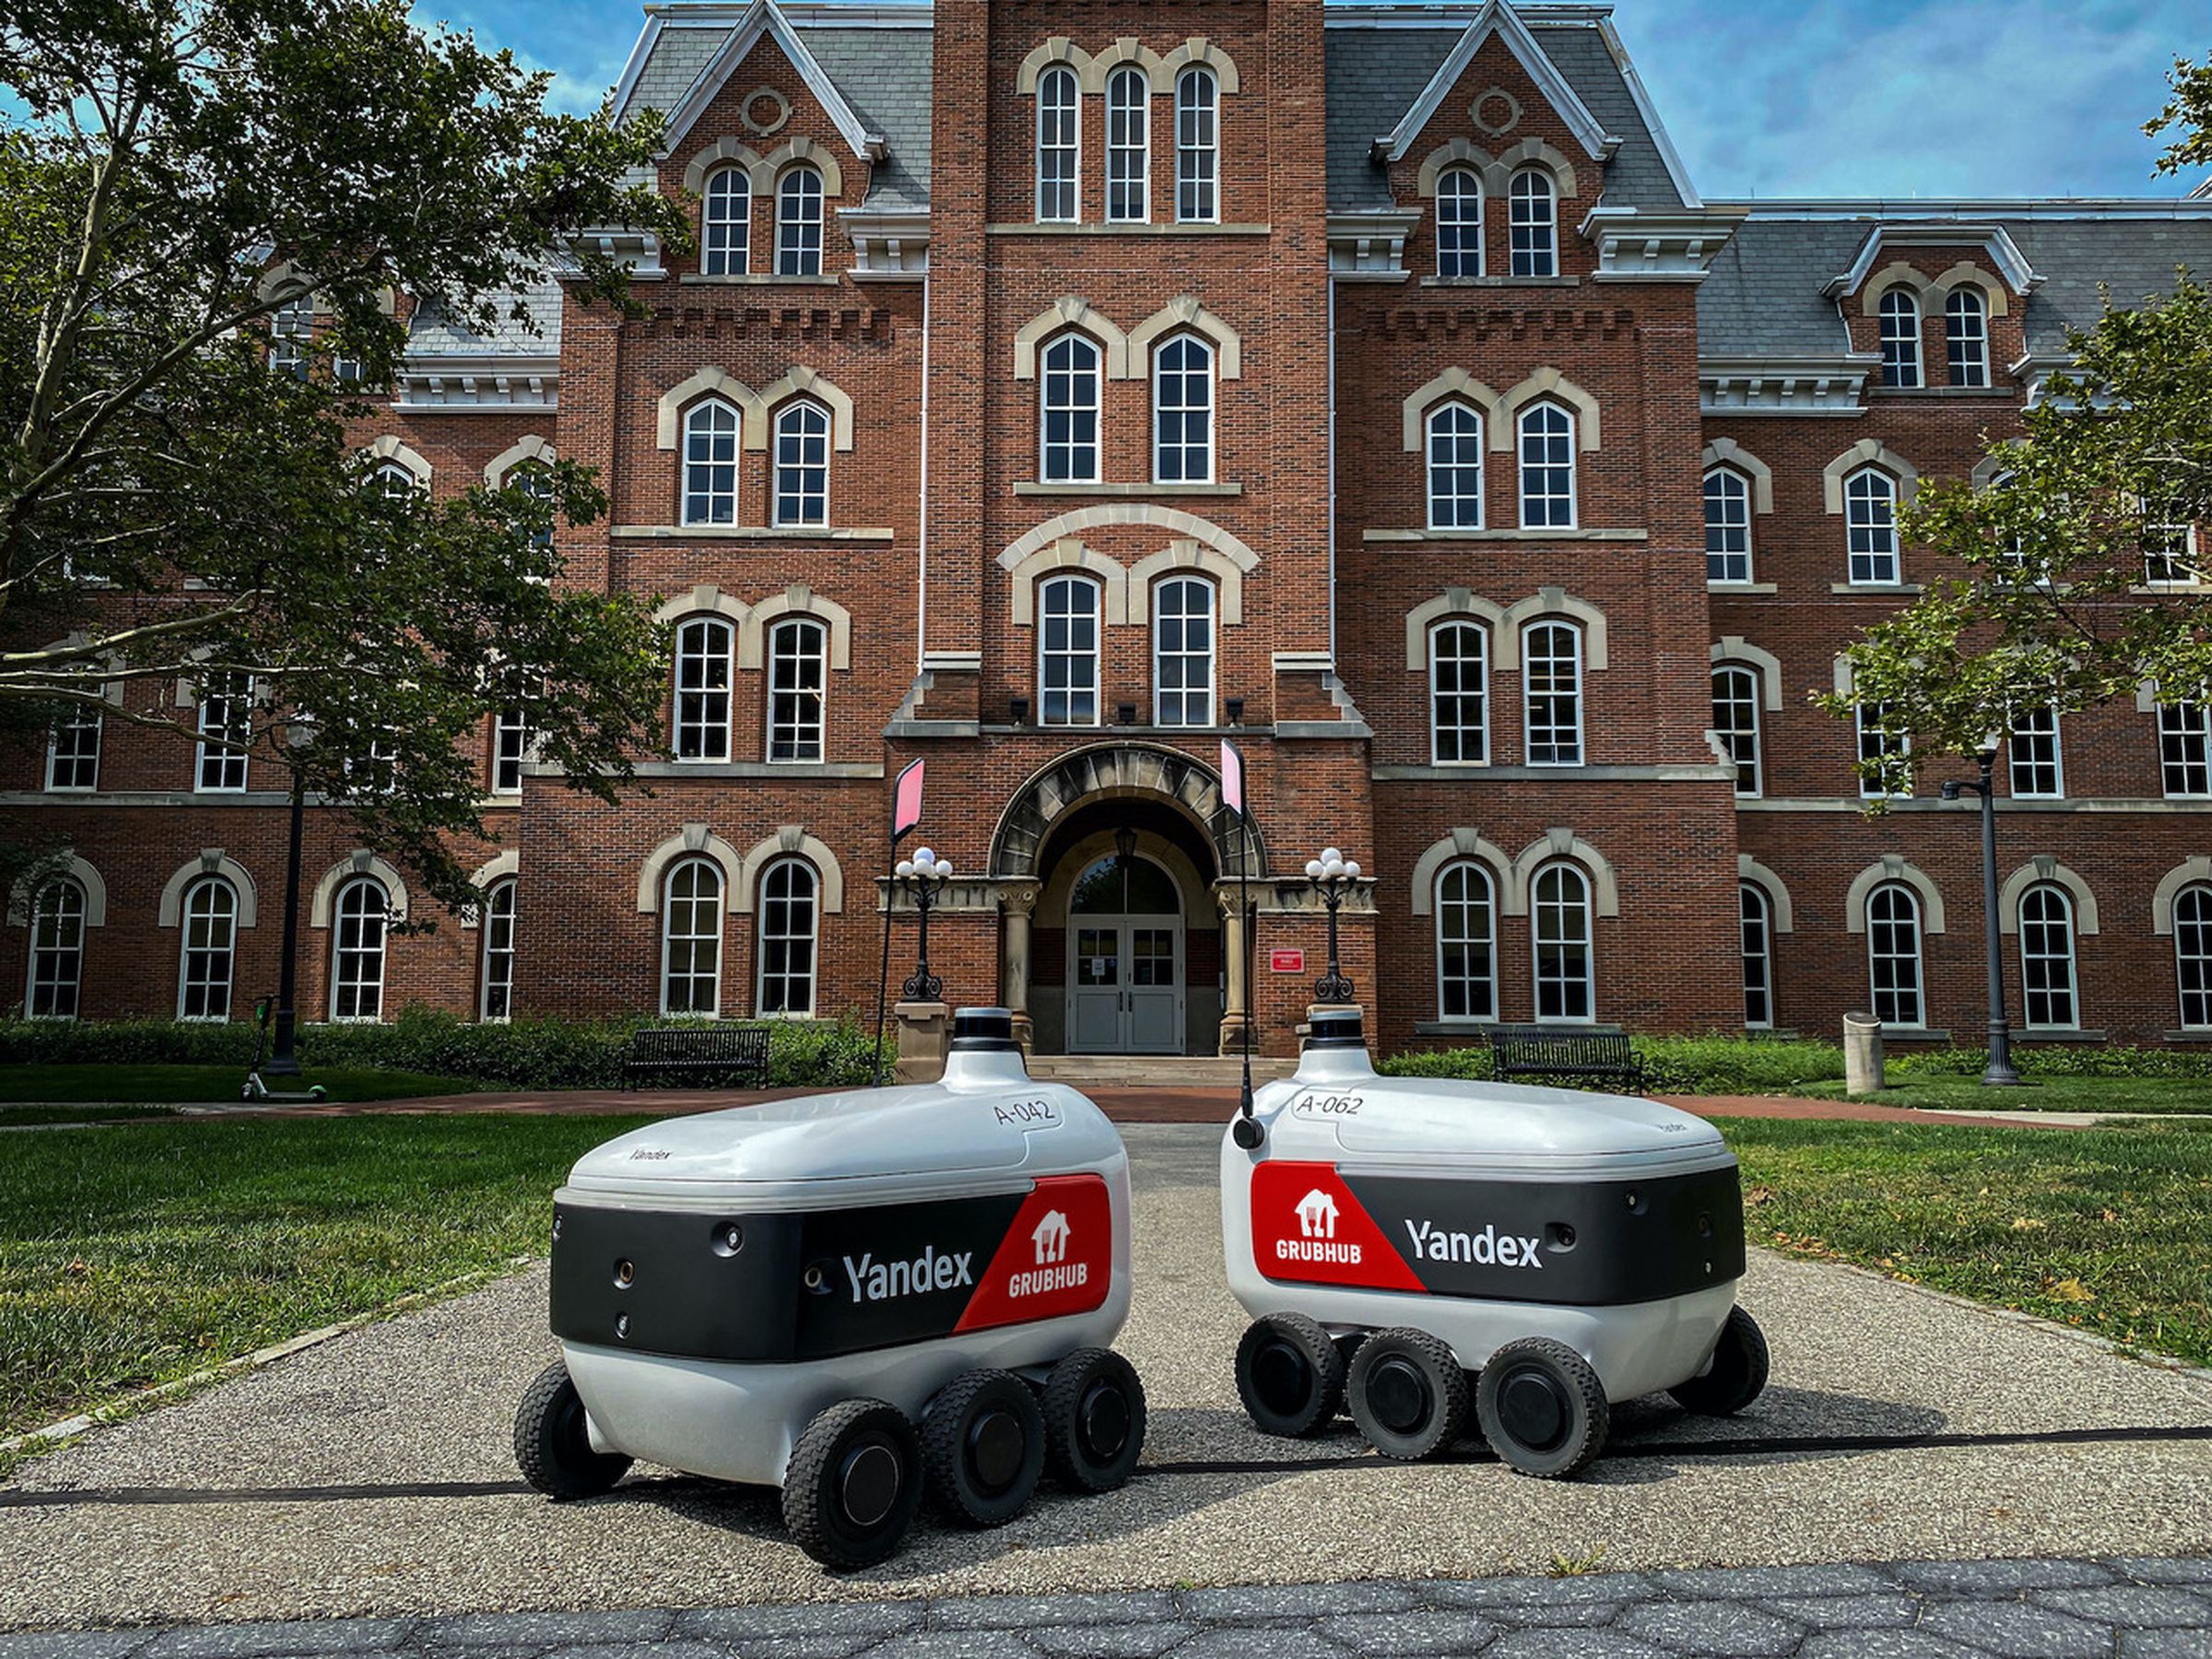 The company was operating a robot delivery pilot at several universities in Arizona and Ohio, with plans to expand to hundreds more. 